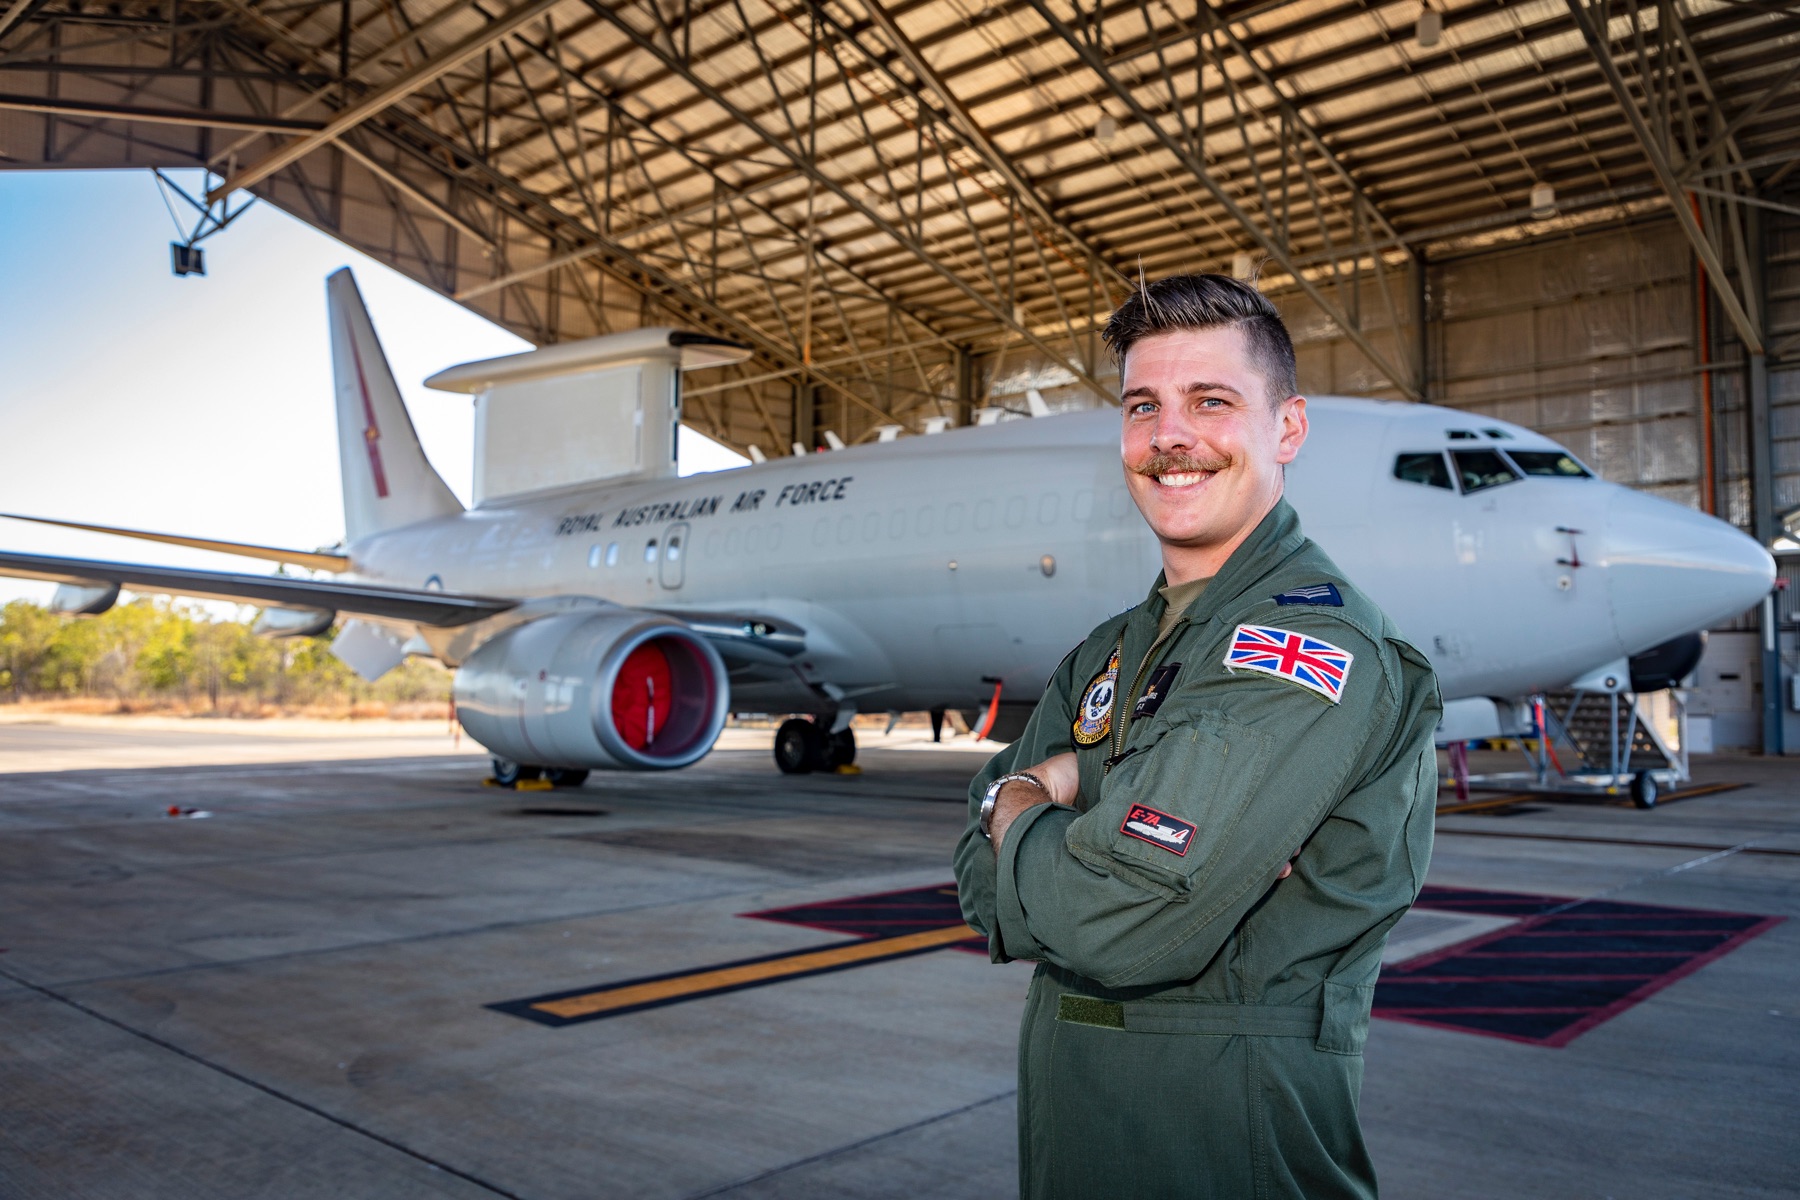 Image shows RAF aviator standing by the Wedgetail aircraft in a hangar.